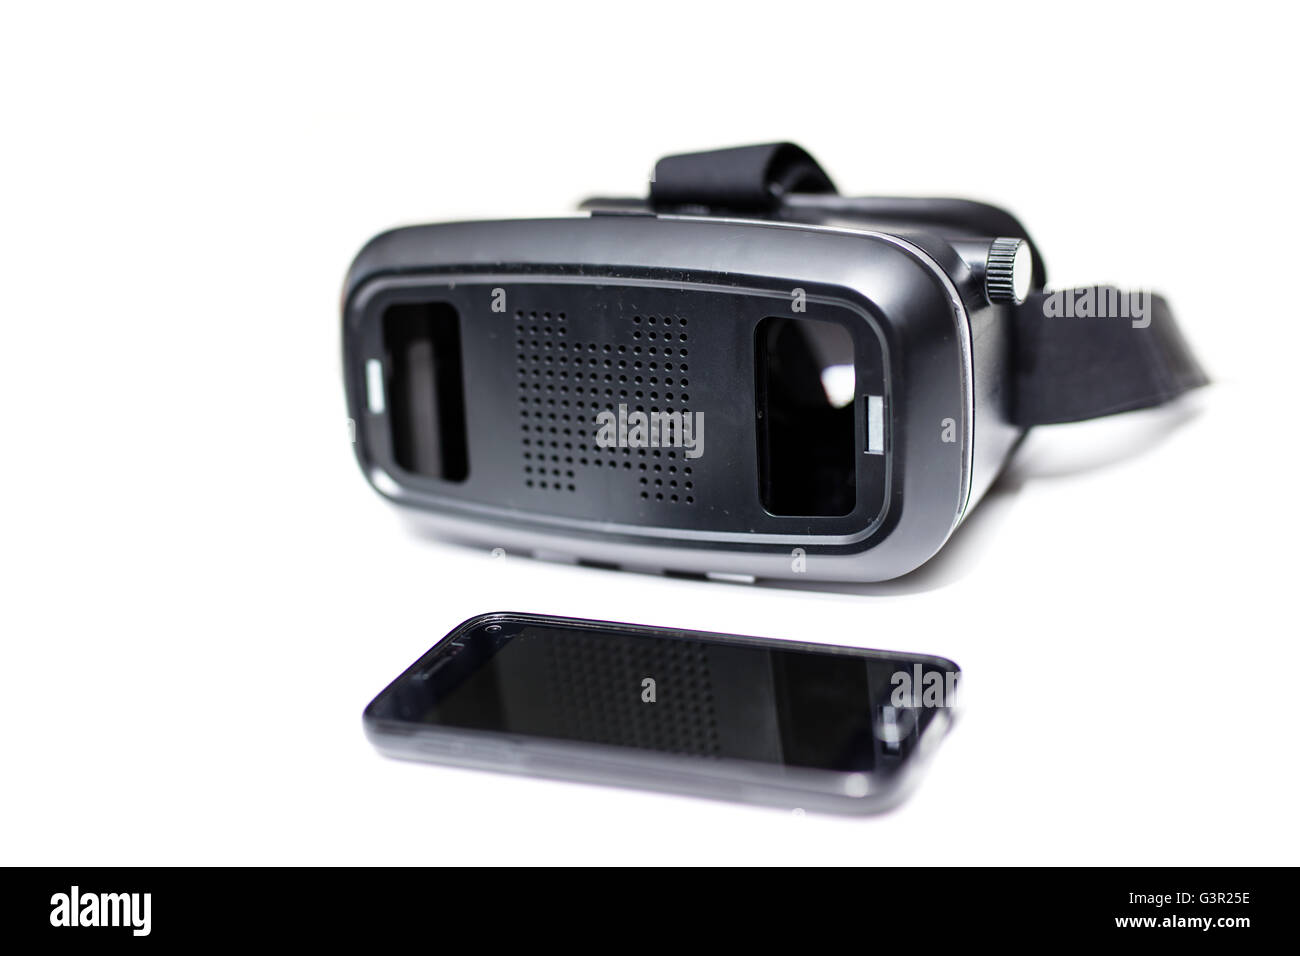 VR glasses for virtual reality games, photo spheres or 3D video. Stock Photo